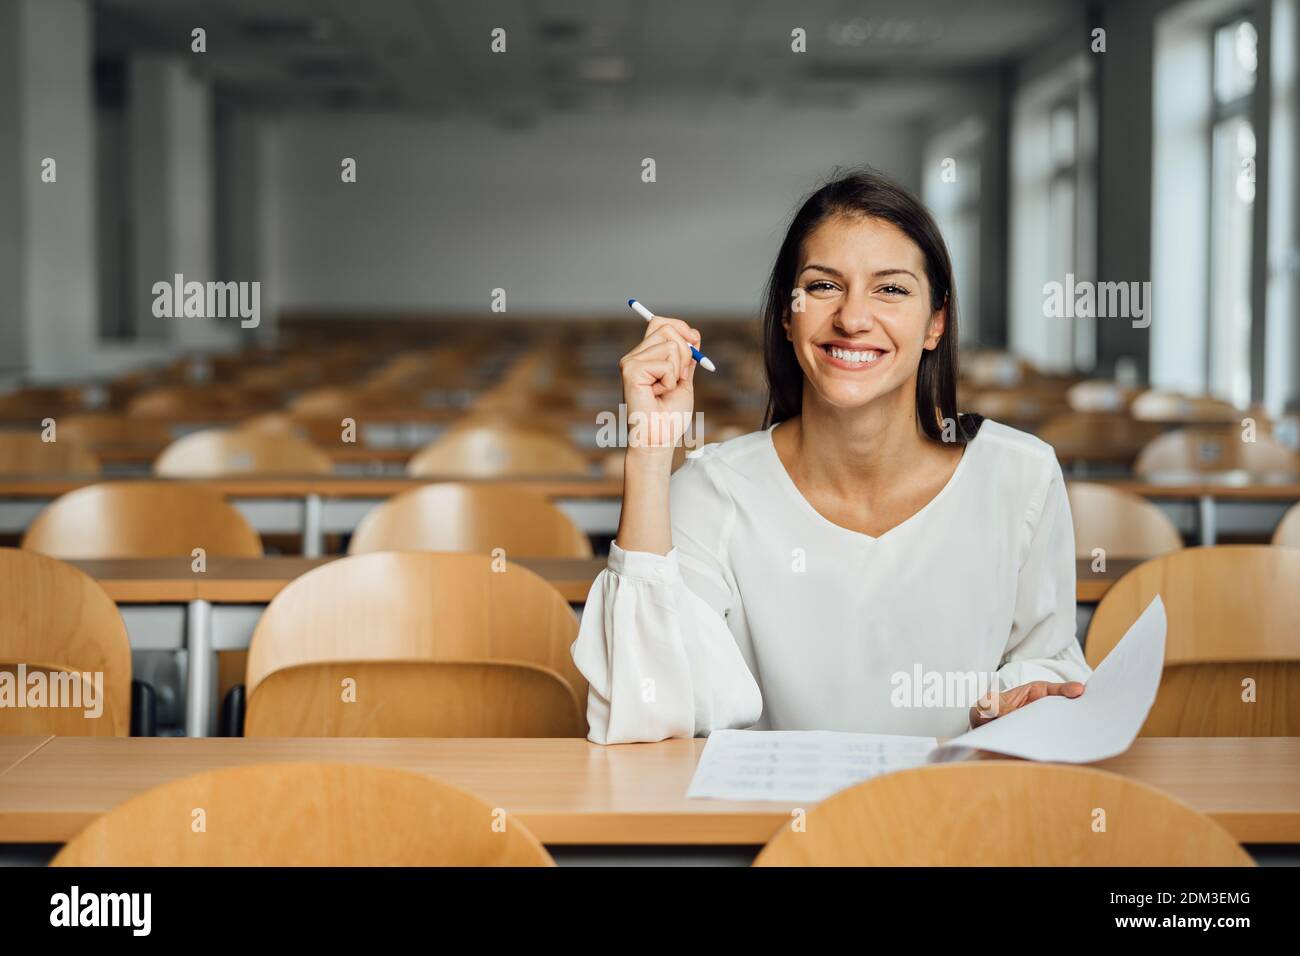 Knowledgable smiling student taking an easy exam in an empty amphitheater. An optimistic student taking an in-class test. Happy woman having stress fr Stock Photo